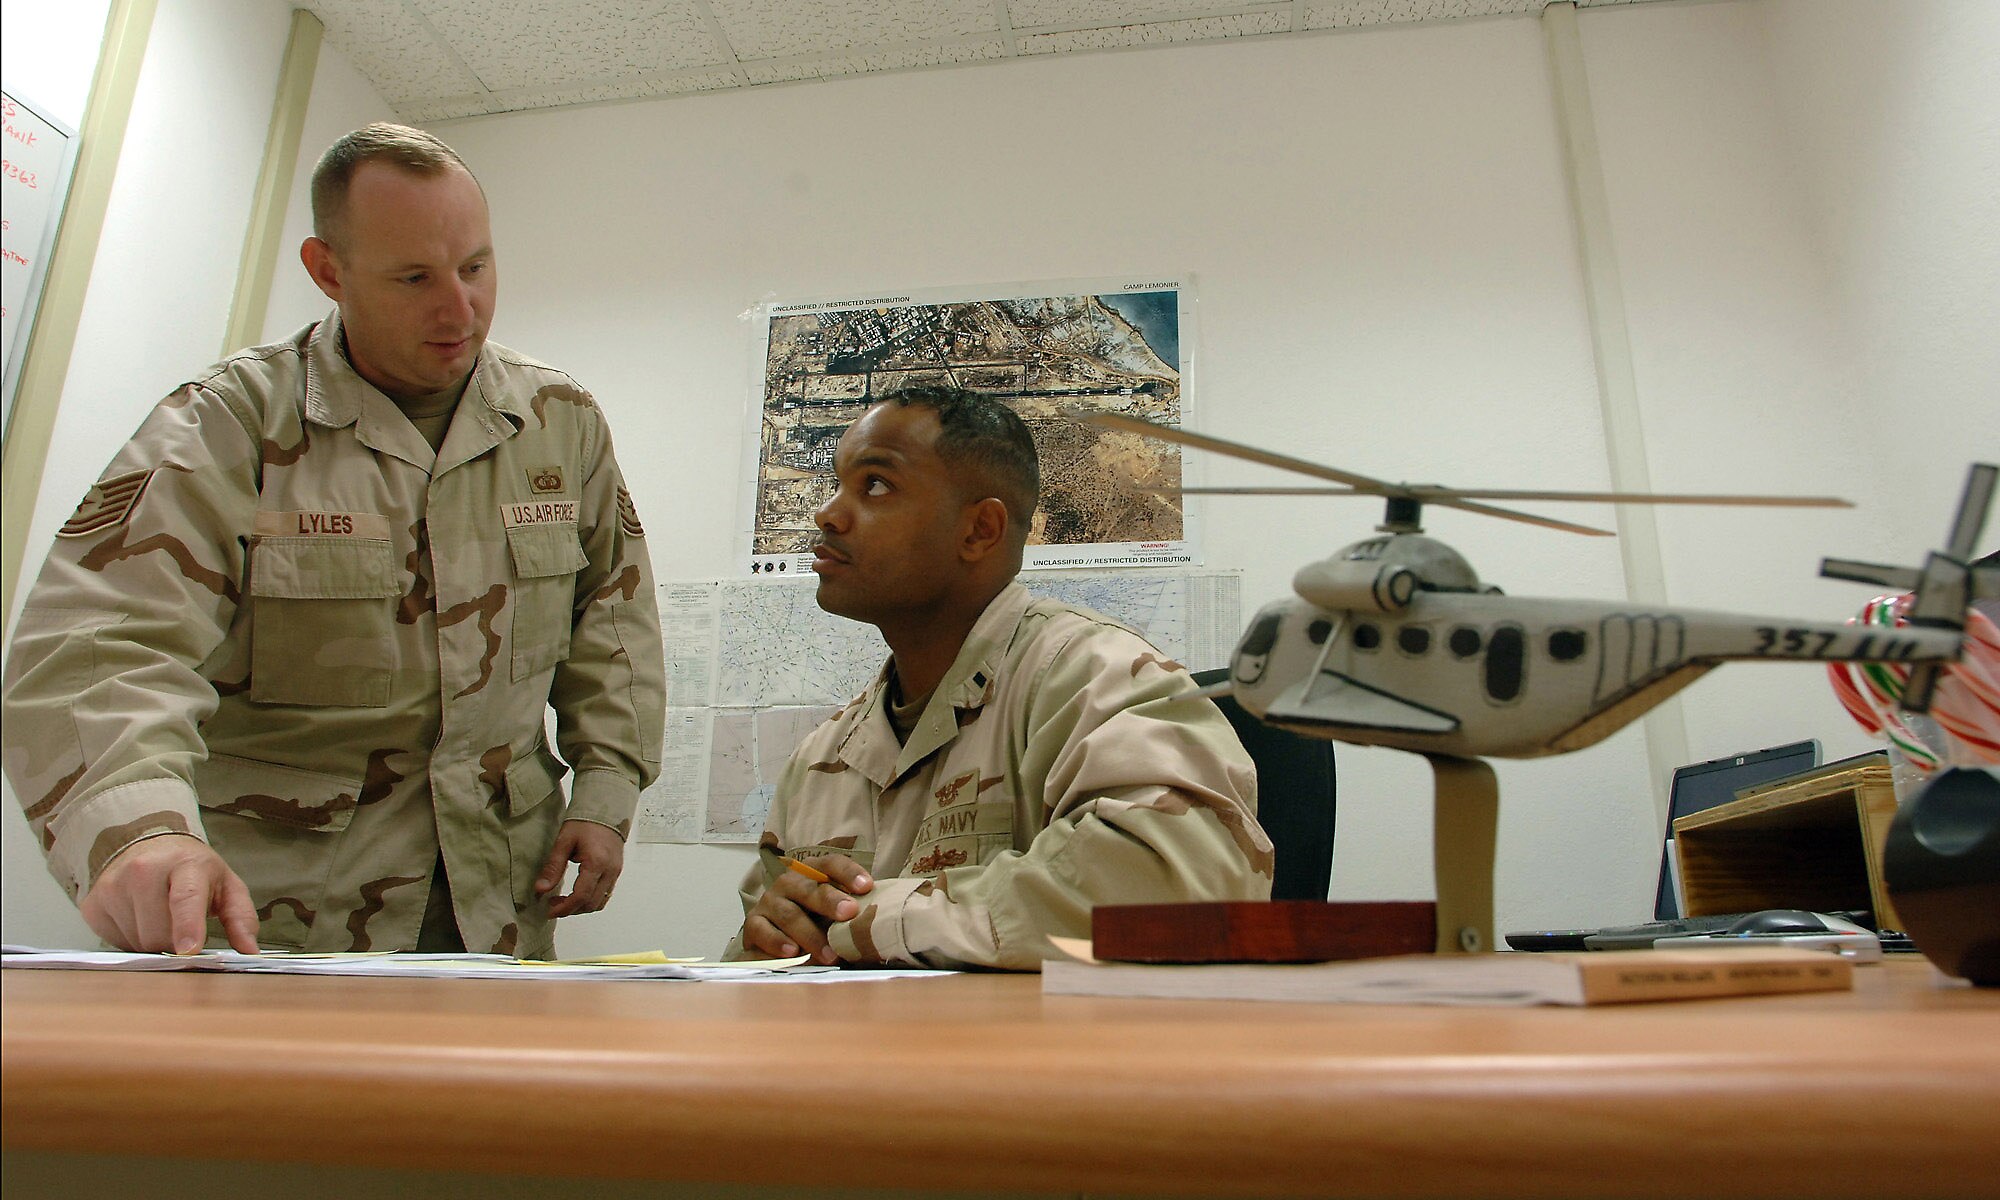 Navy Lt. j.g. Stewart Arthur and Tech. Sgt. Brian Lyles manage 10 Air Force and Navy servicemembers who partner with Djiboutian civilians and French military in guiding all aircraft flying in and out of the airfield shared by Camp Lemonier and the Djibouti-Ambouli airport. They are the enlisted and commissioned air traffic and early warning control officers assigned to Combined Joint Task Force-Horn of Africa headquarters at Camp Lemonier, Djibouti. Lieutenant Arthur is deployed from Naval Air Station North Island, San Diego, Calif., and Sergeant Lyles is deployed from Royal Air Force Mildenhall, England. (U.S. Air Force photo/Master Sgt. Scott Wagers)